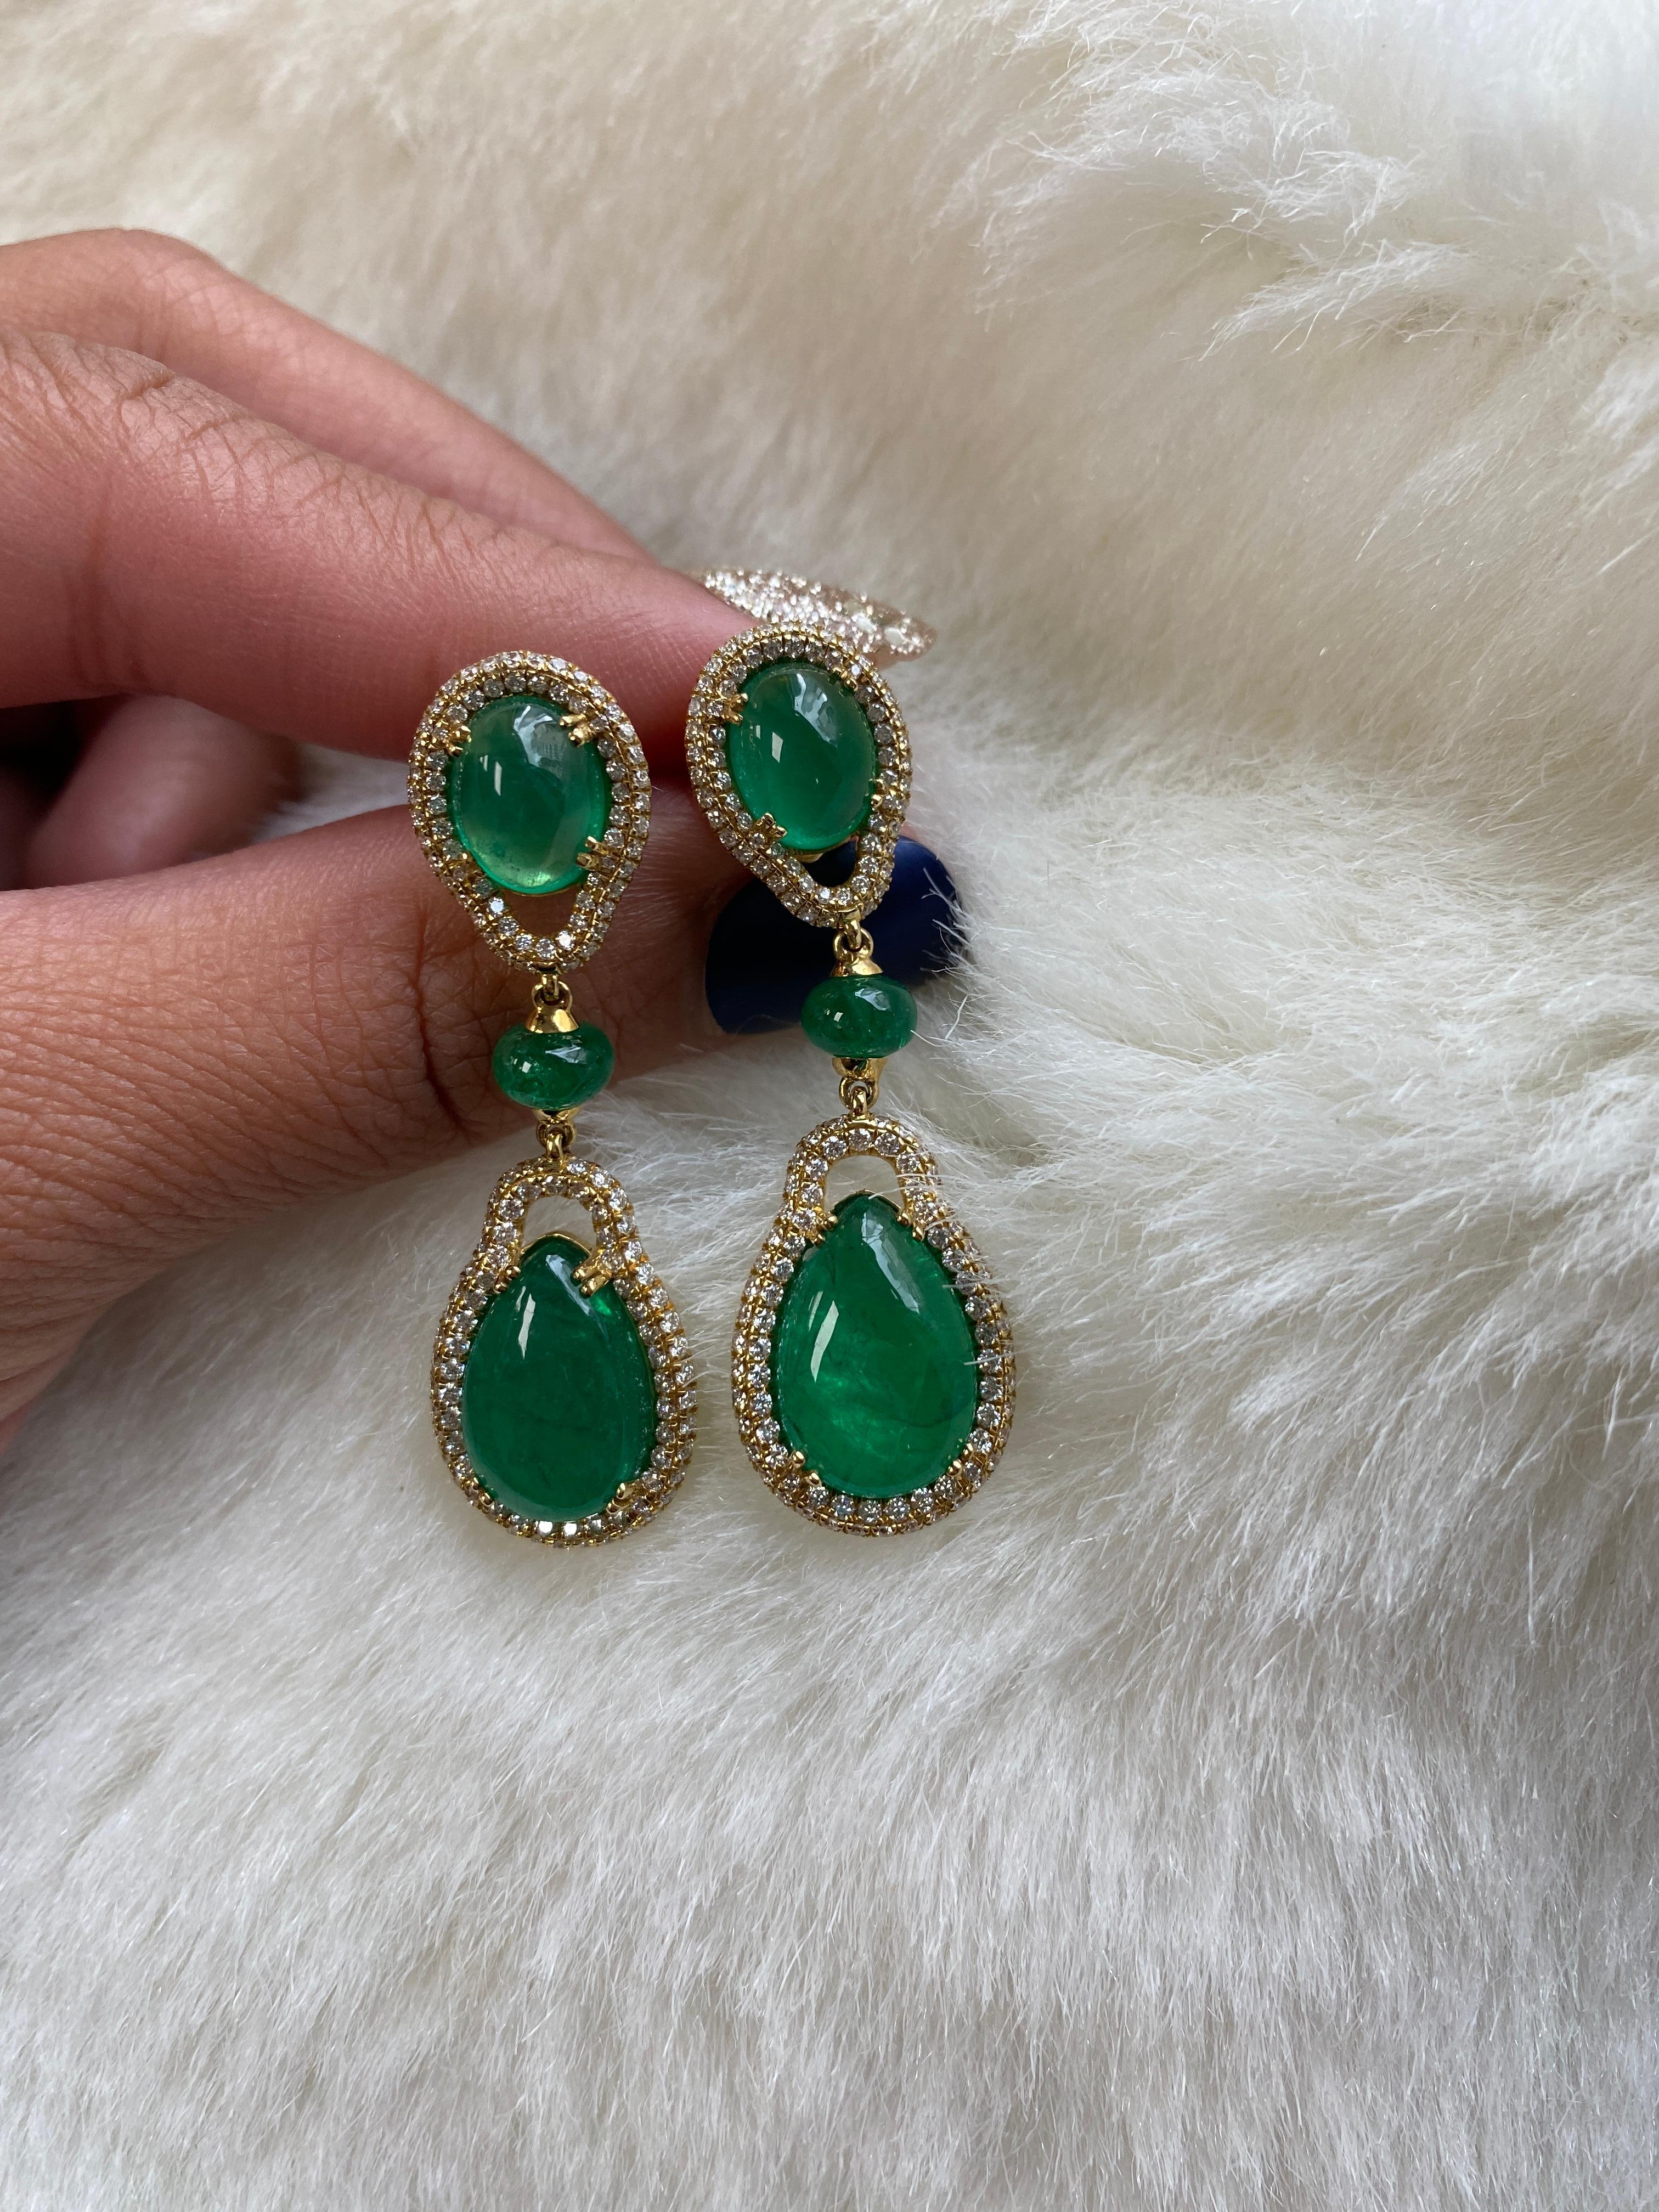 Contemporary Goshwara Pear Cabs and Emerald Round Beads With Diamond Earrings